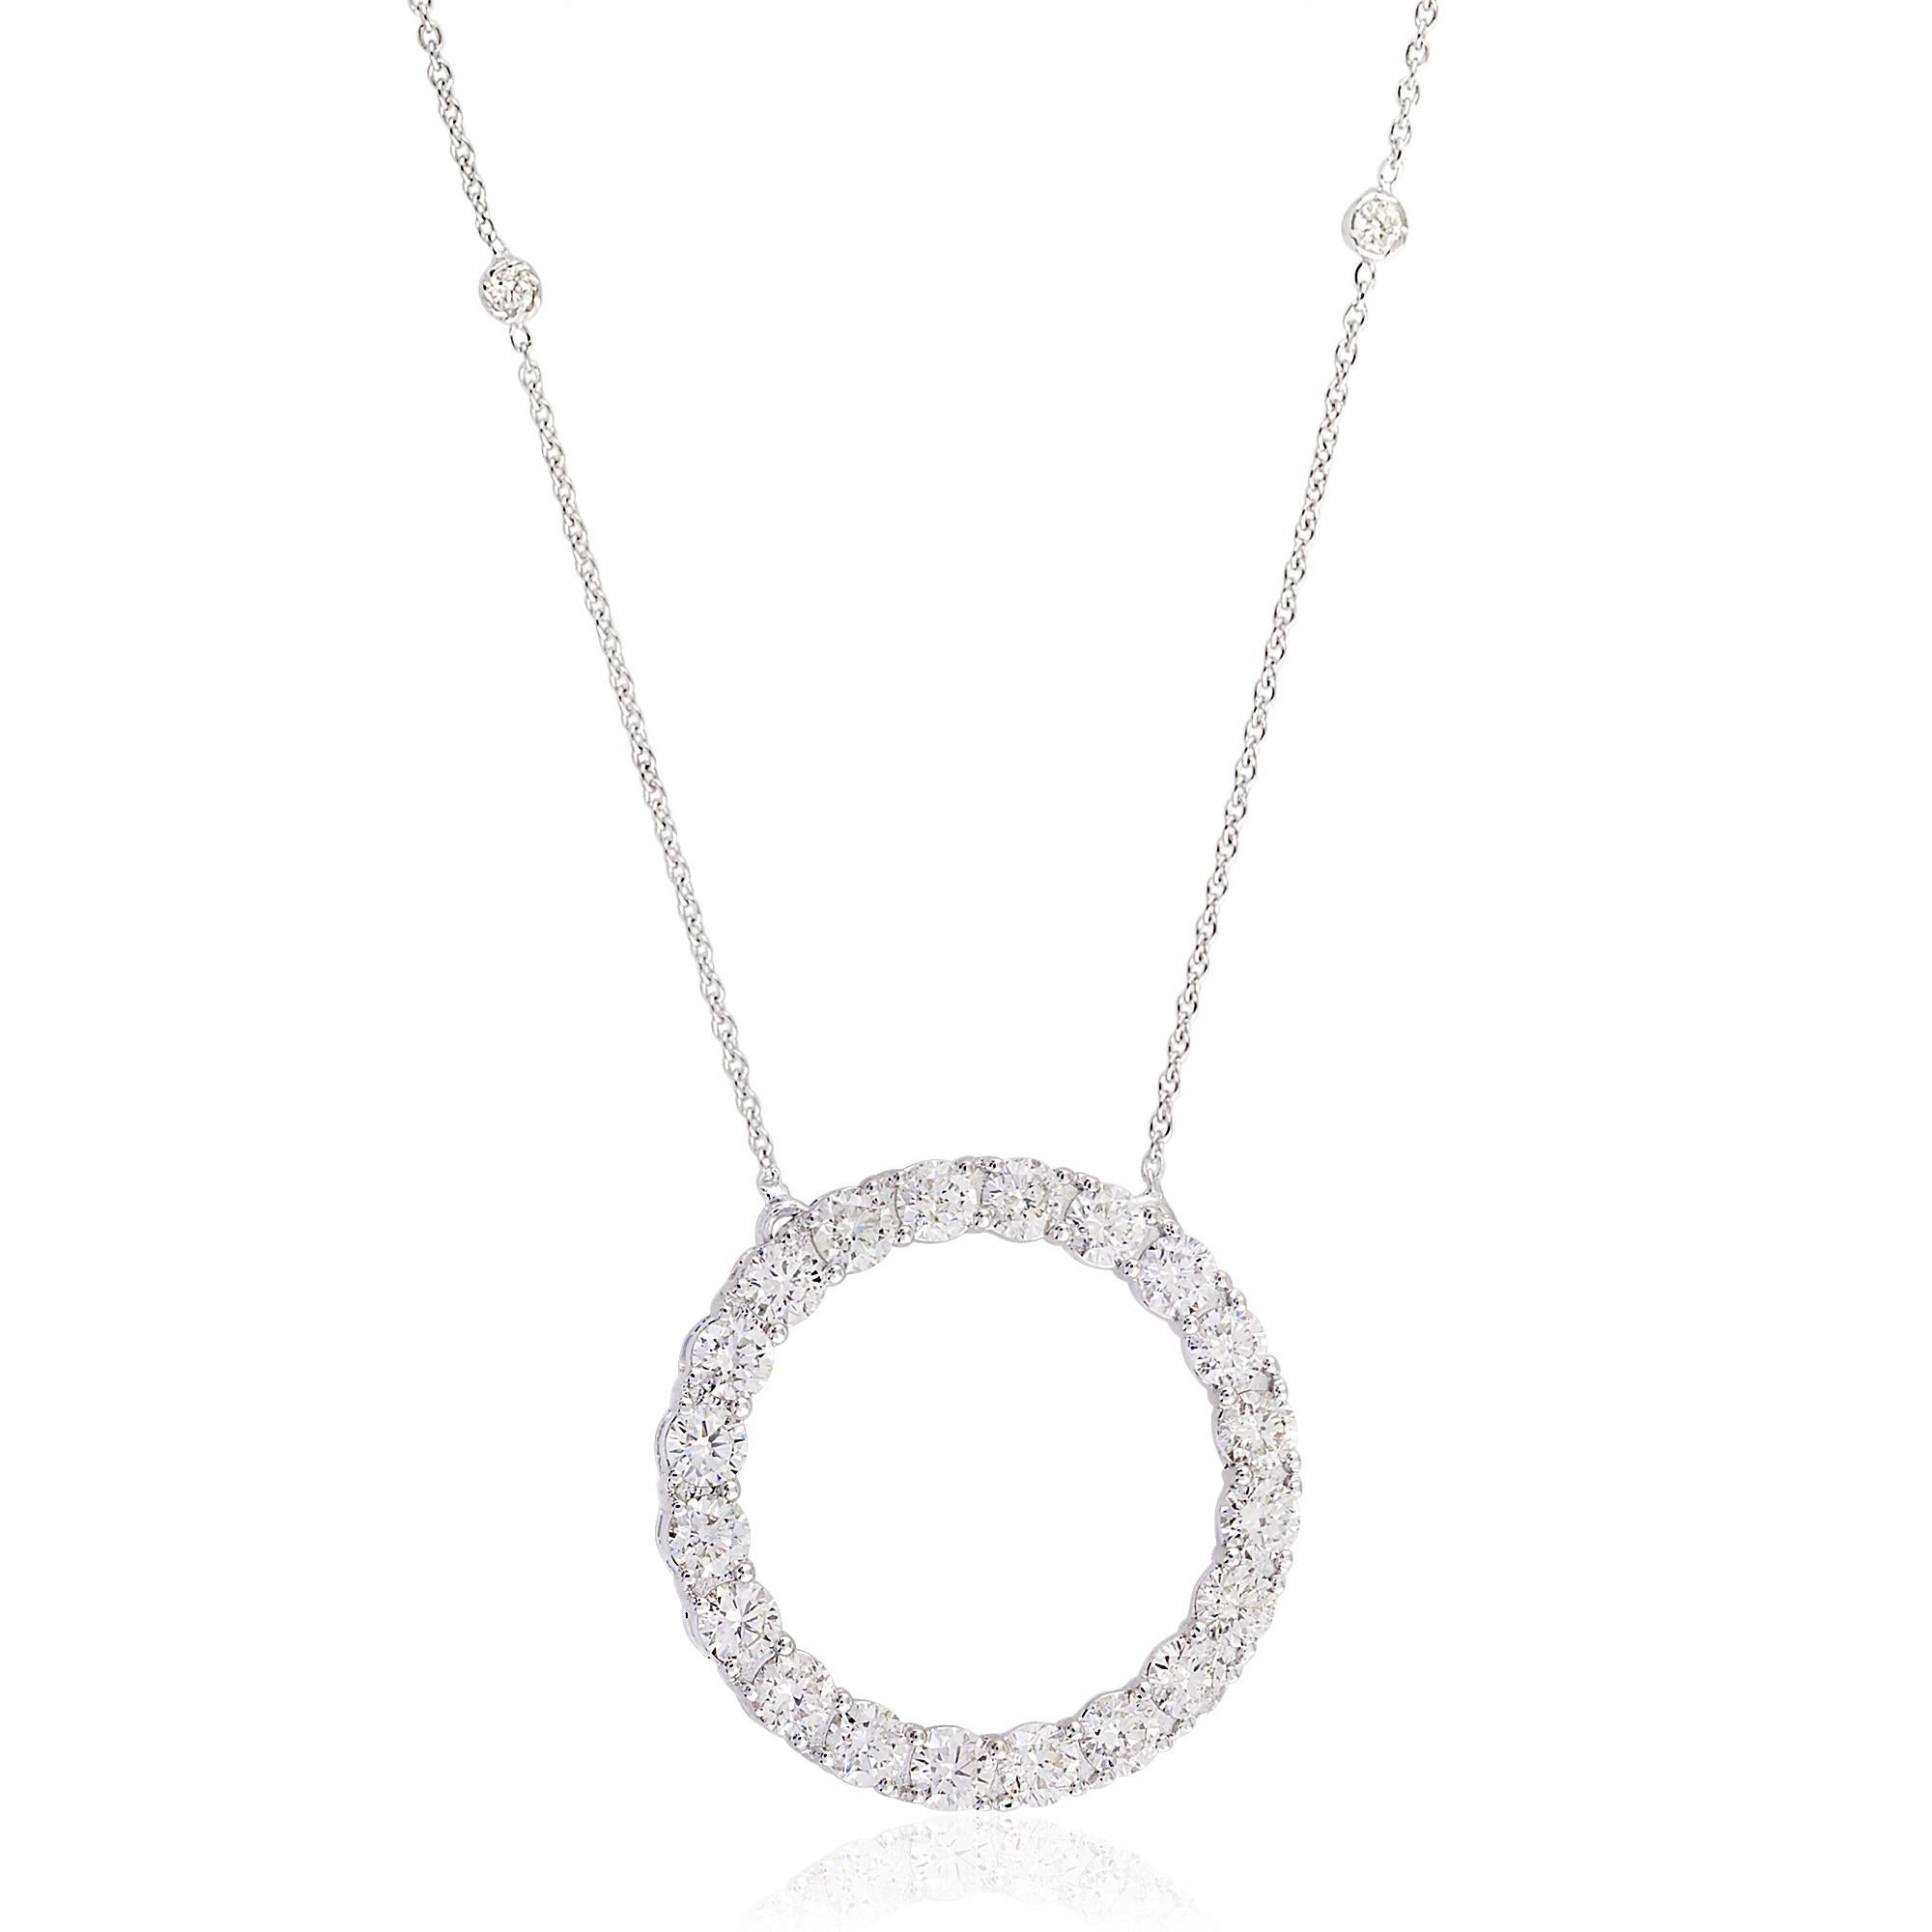 The circle is a symbol of eternity and unity, representing a timeless connection. It is a powerful emblem of wholeness and perfection, making this pendant necklace a meaningful and sentimental piece. The 18k white gold setting enhances the beauty of